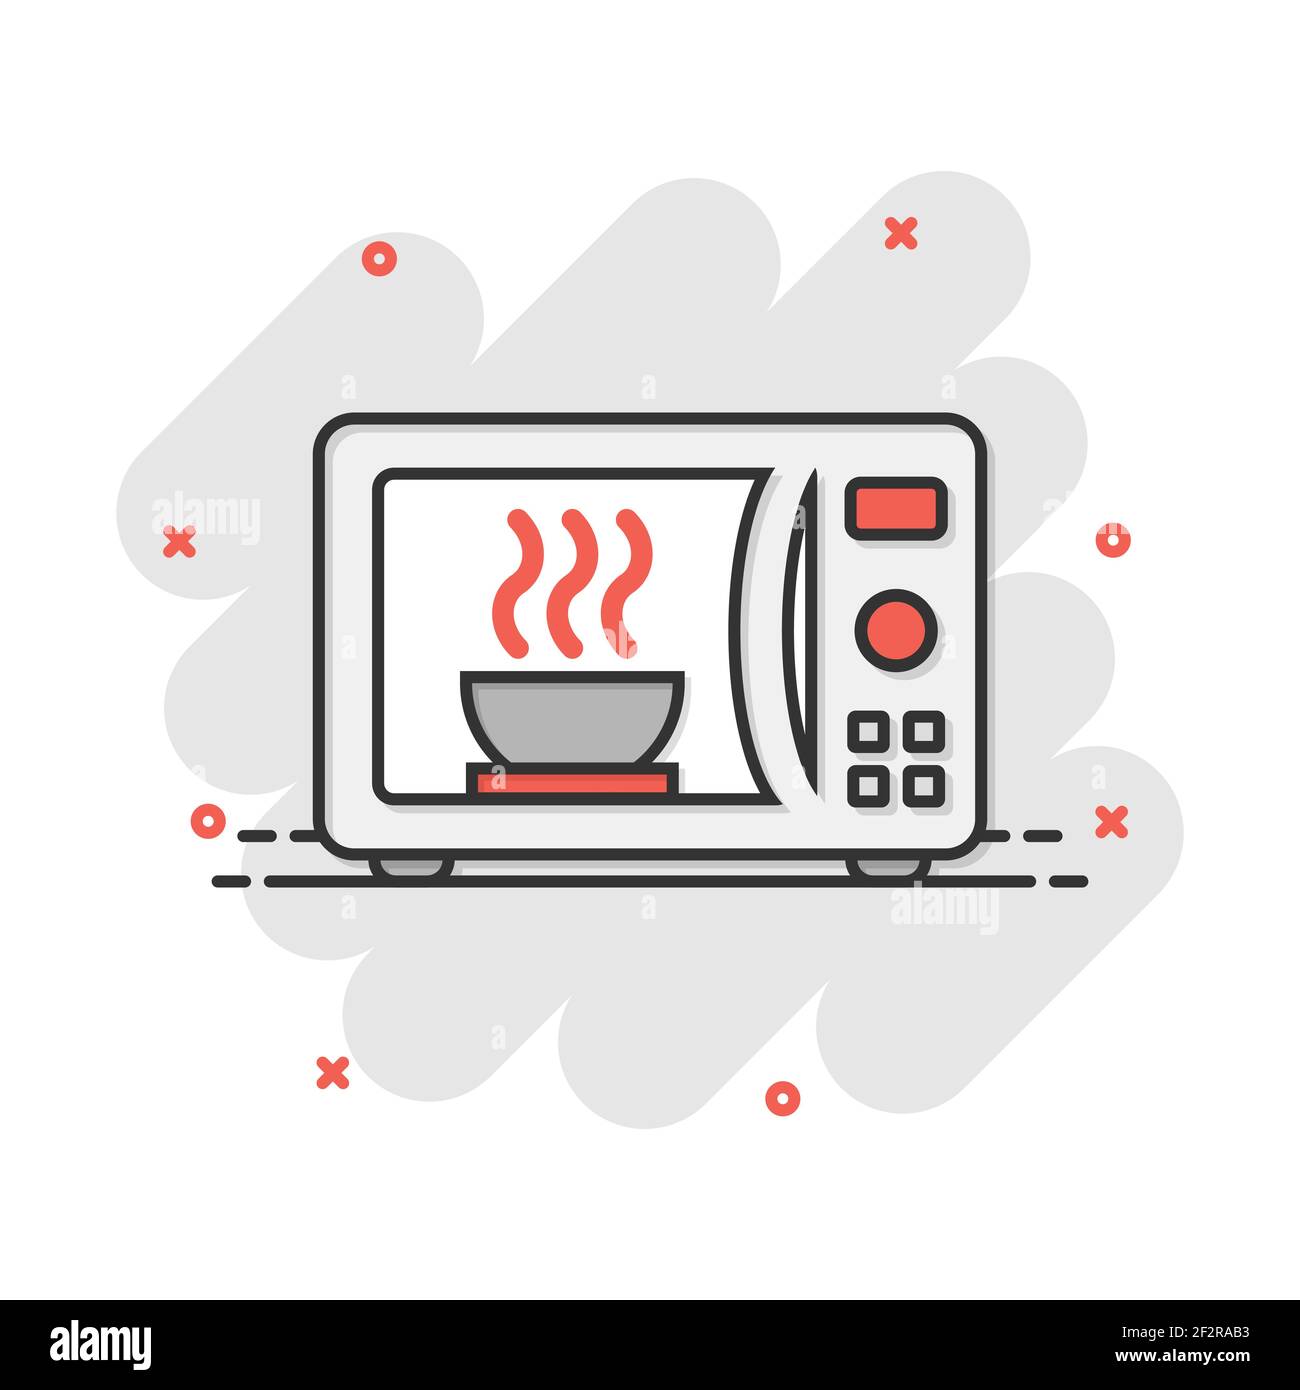 https://c8.alamy.com/comp/2F2RAB3/vector-cartoon-microwave-icon-in-comic-style-microwave-oven-sign-illustration-pictogram-stove-business-splash-effect-concept-2F2RAB3.jpg